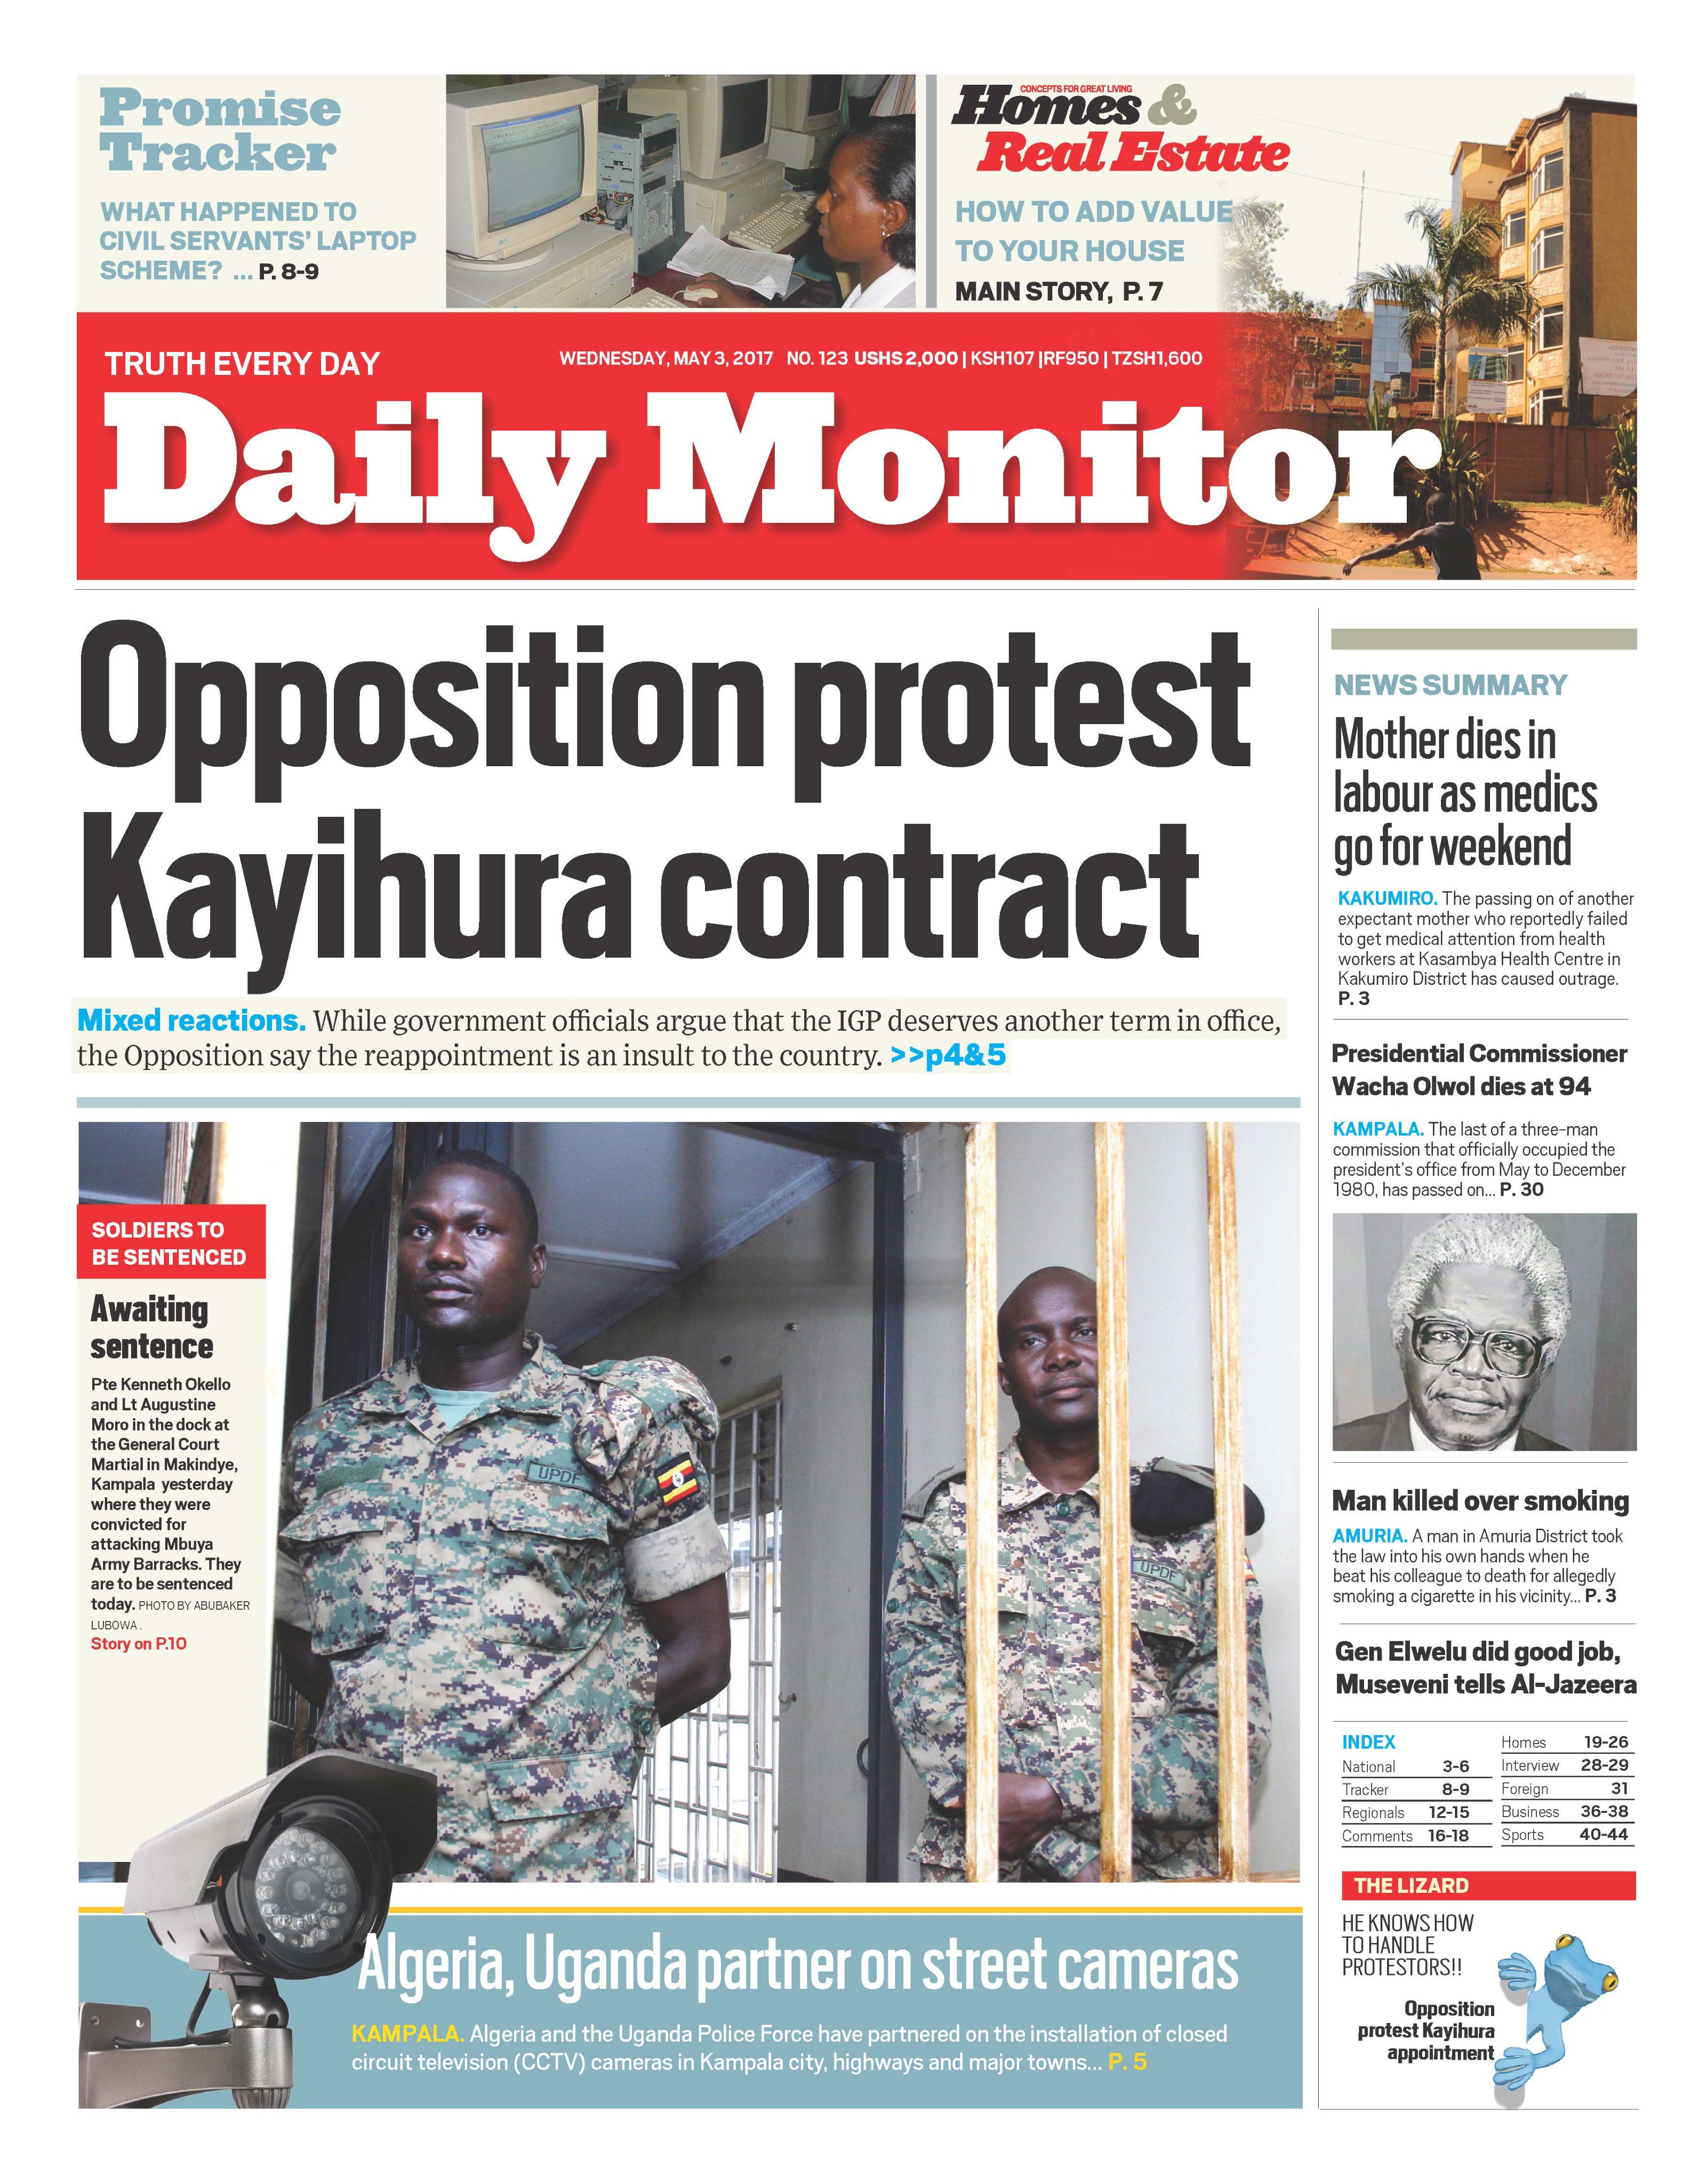 Daily Monitor on Twitter: "TODAY. Opposition protest Kayihura contract In the Promise Tracker. What happened to civil servants' laptop scheme? Do not miss your https://t.co/mUAkBCbeDr"